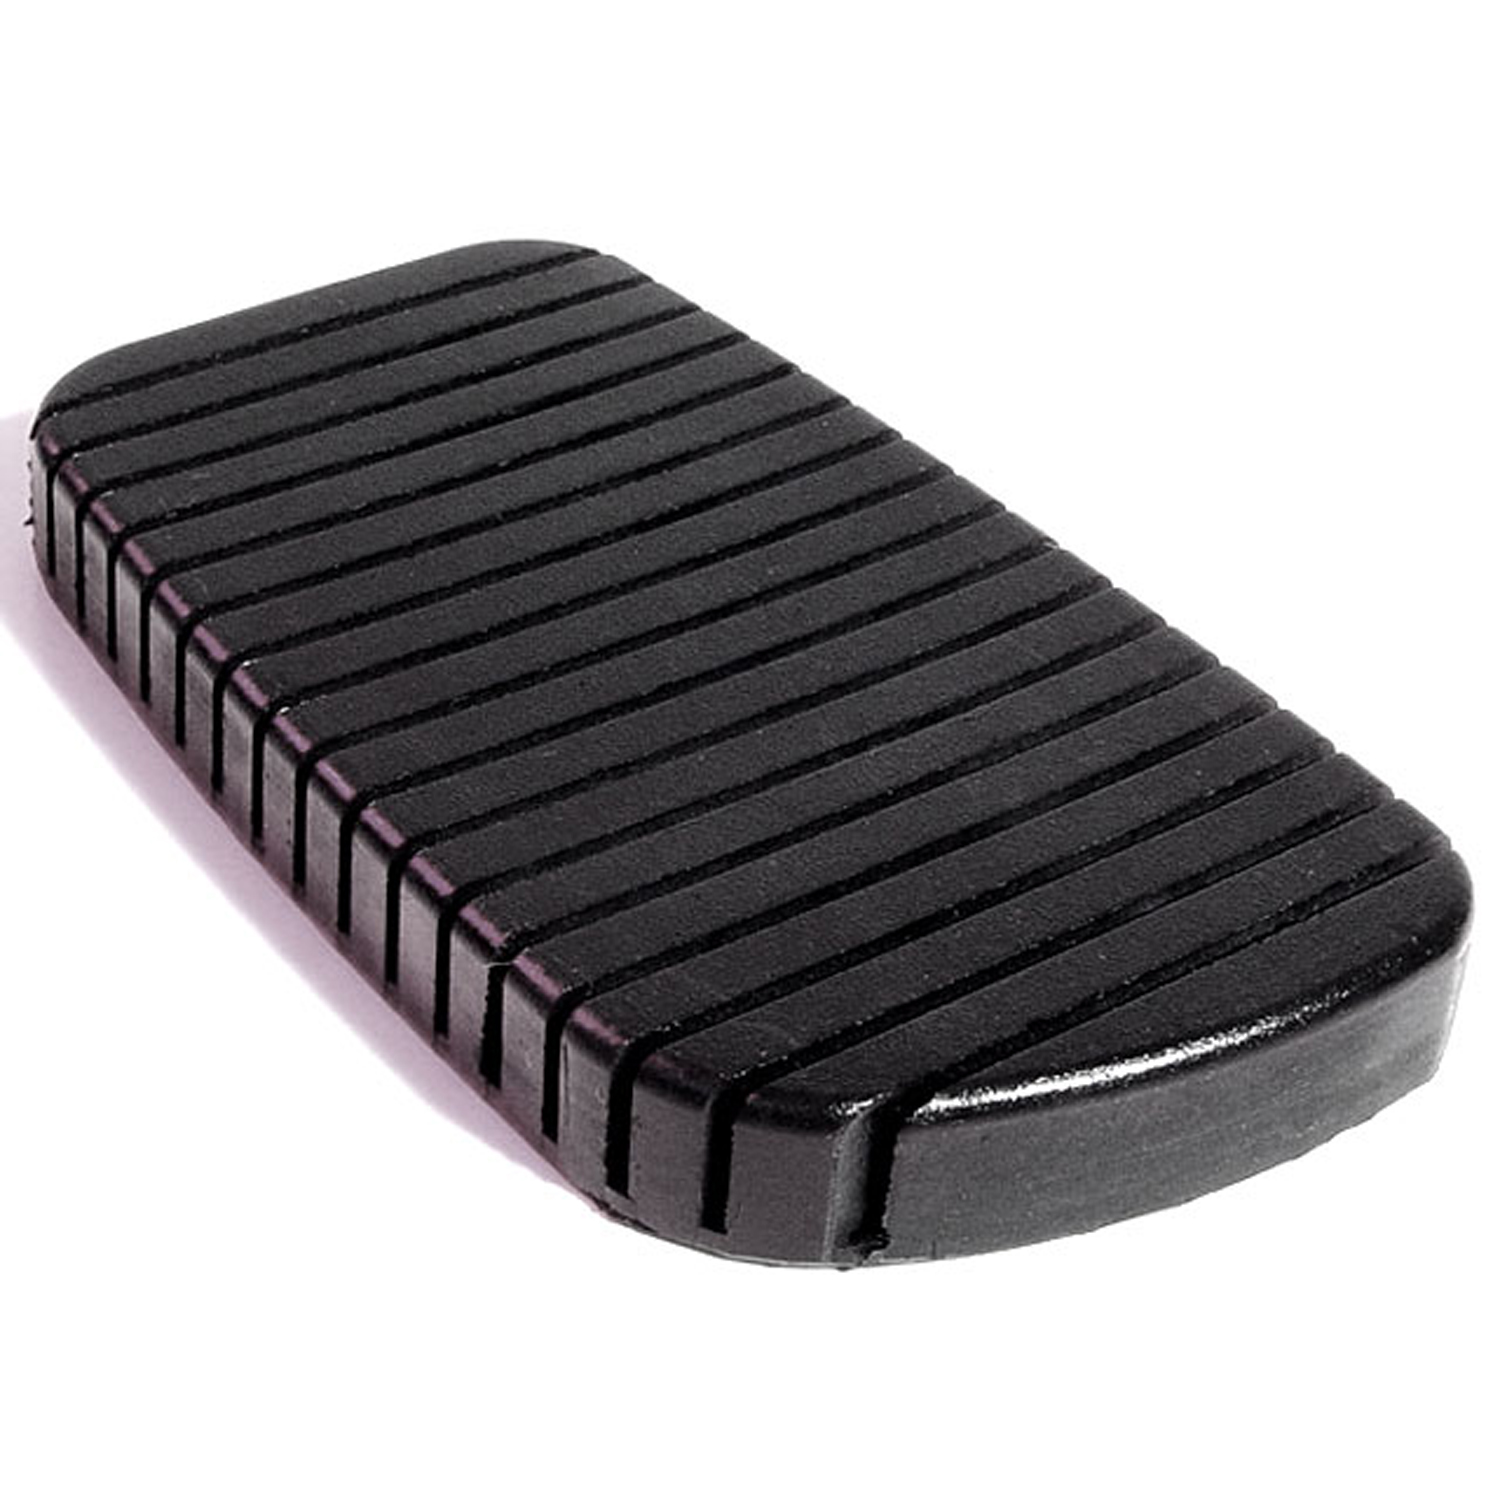 1956 Mercury Monterey Brake Pedal Pad.  Correct reproduction of a difficult part-CB 90-C